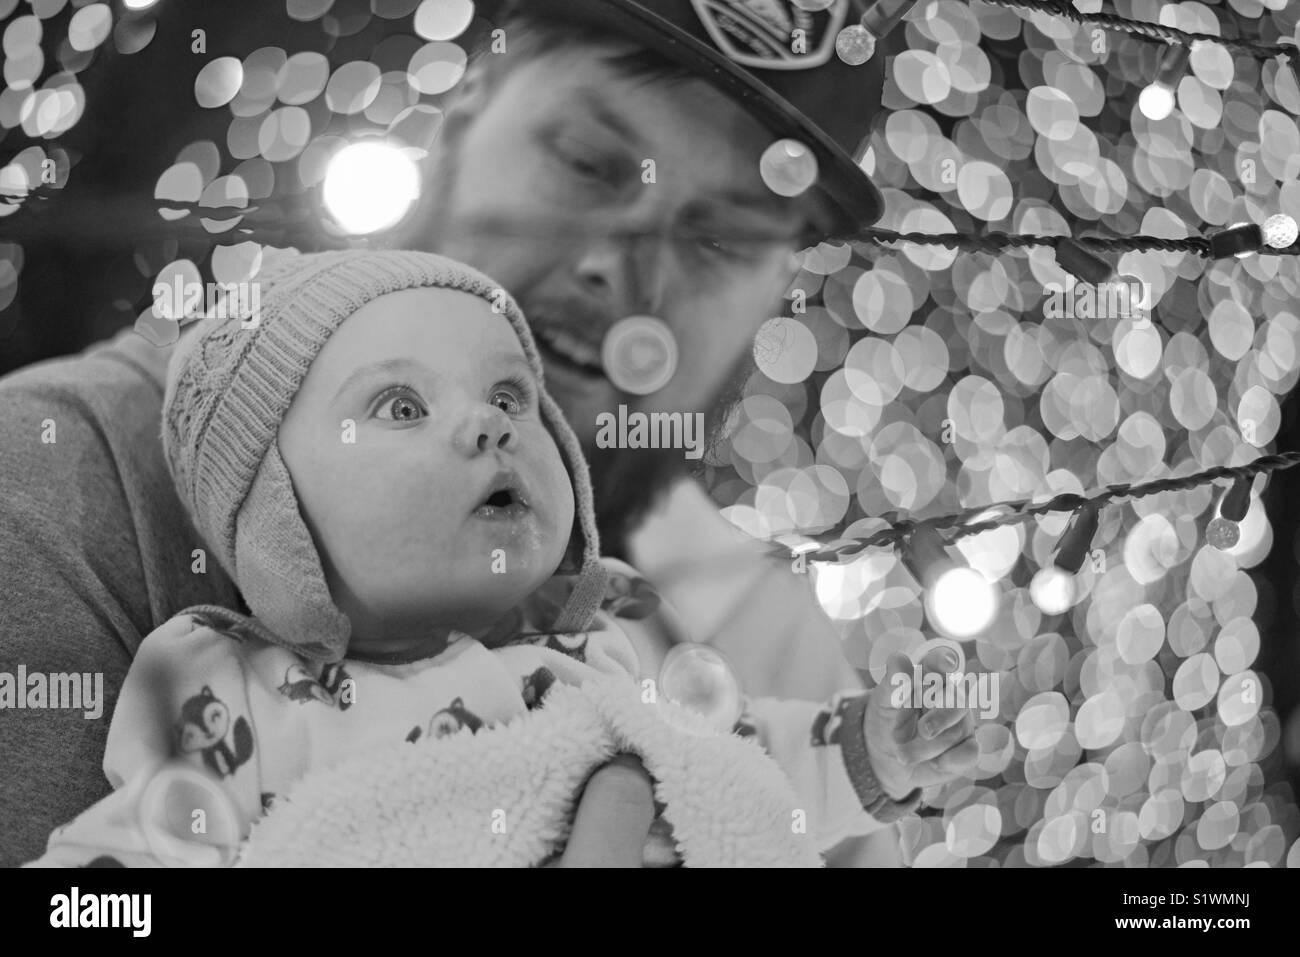 A dad taking his baby to see Christmas lights for the first time. Stock Photo